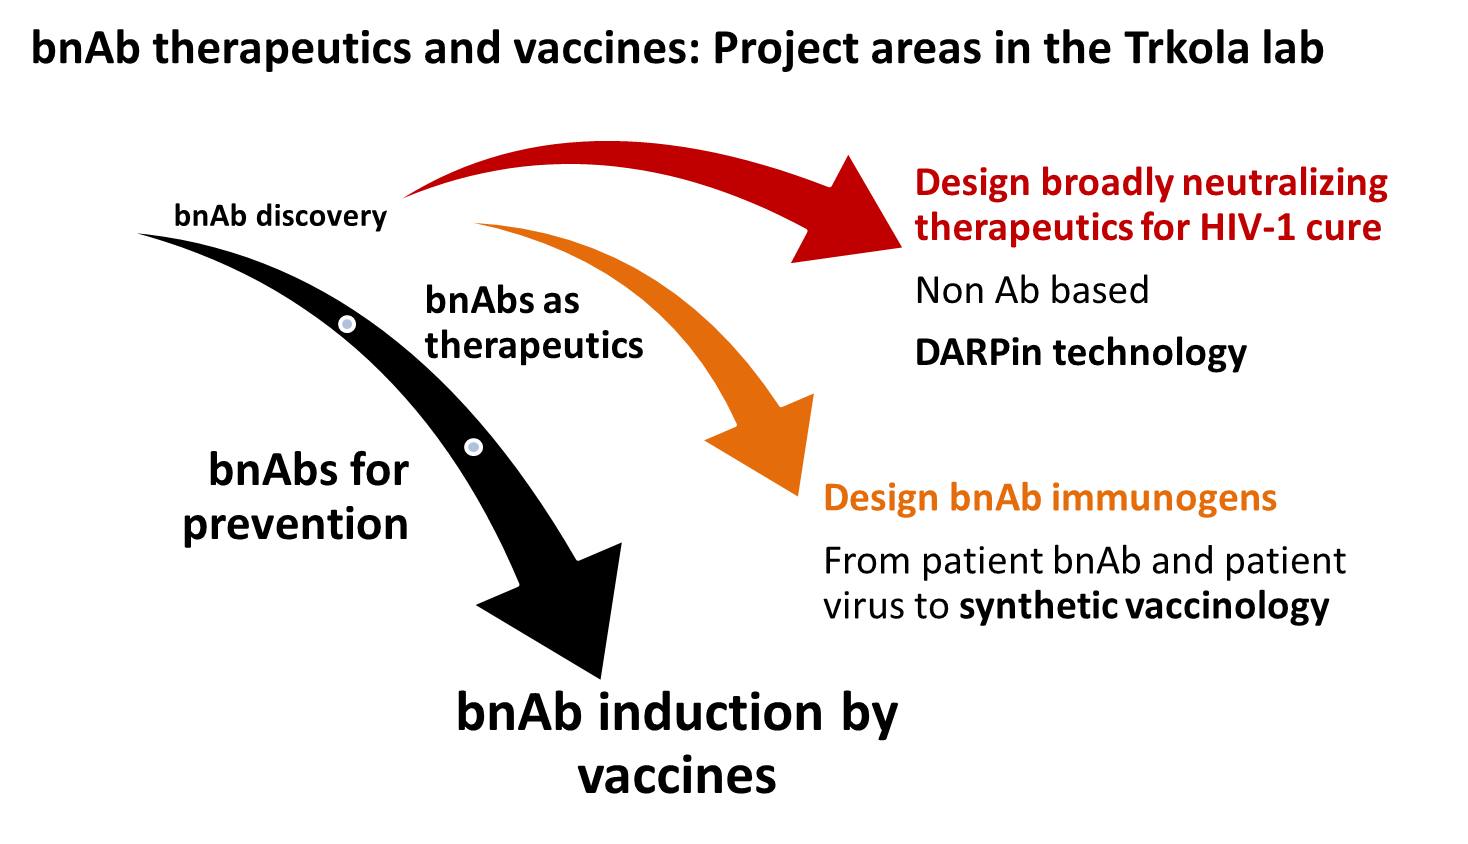 bnAb therapeutics and vaccines: Project areas in the Trkola lab